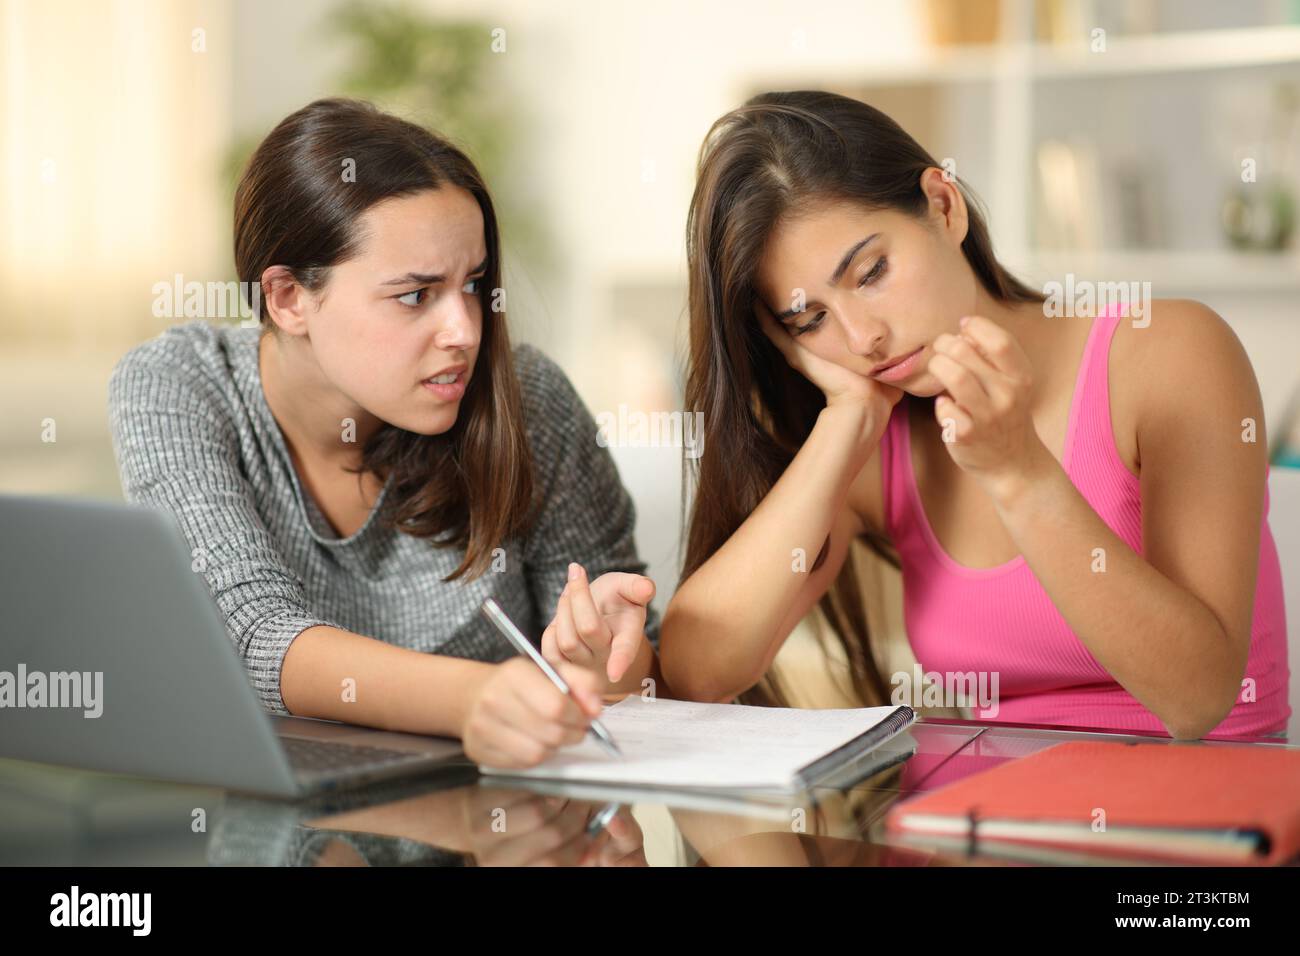 Student trying to study and another one wasting time at home Stock Photo